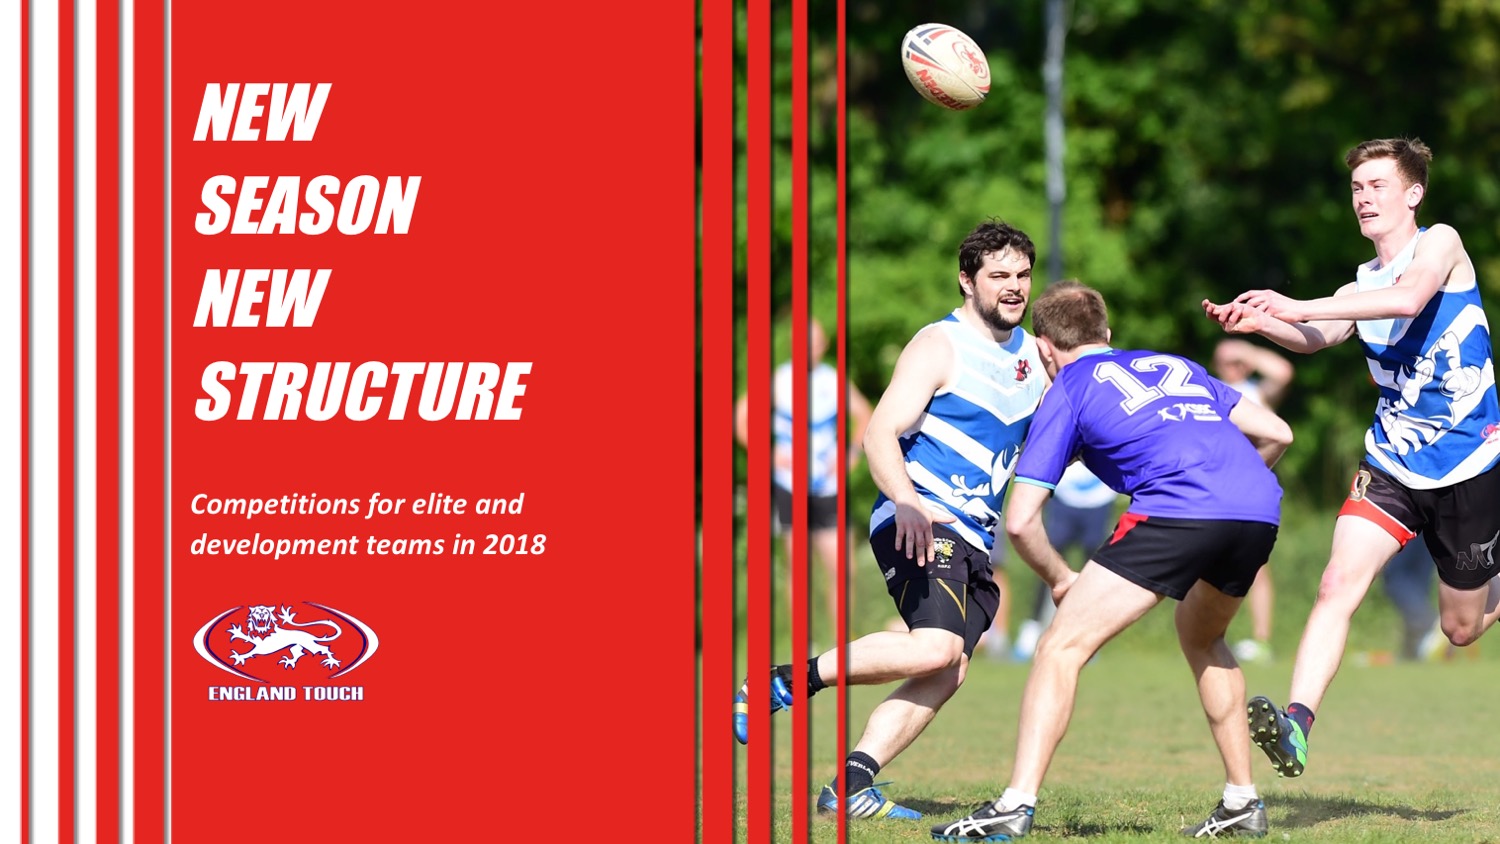 England Touch announces new competition structure for 2018 (1)